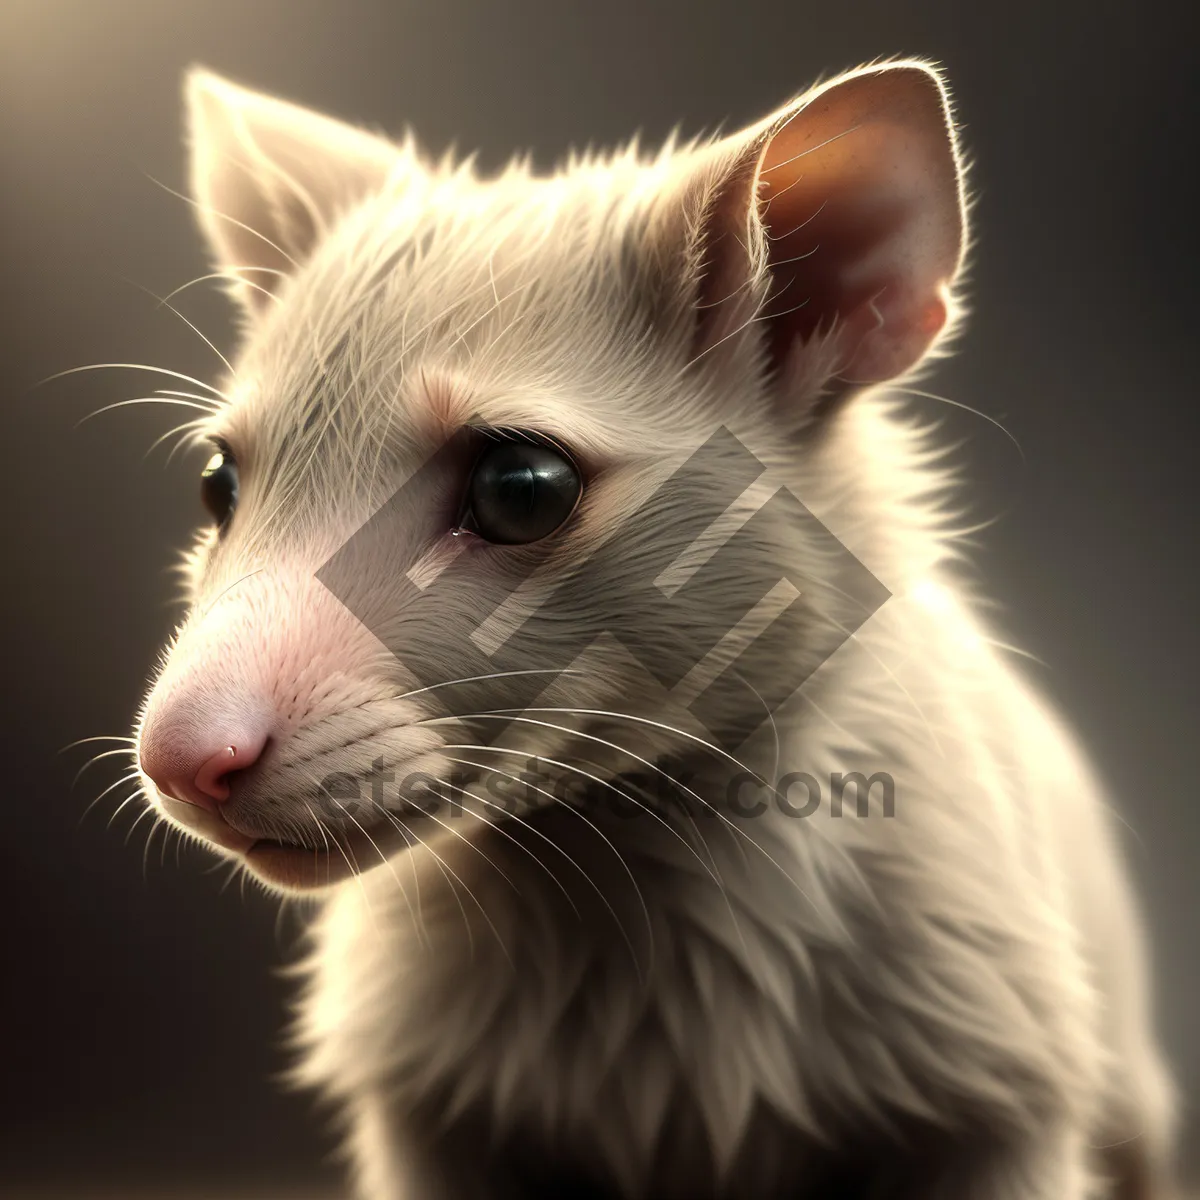 Picture of Furry Little Rodent with Adorable Whiskers